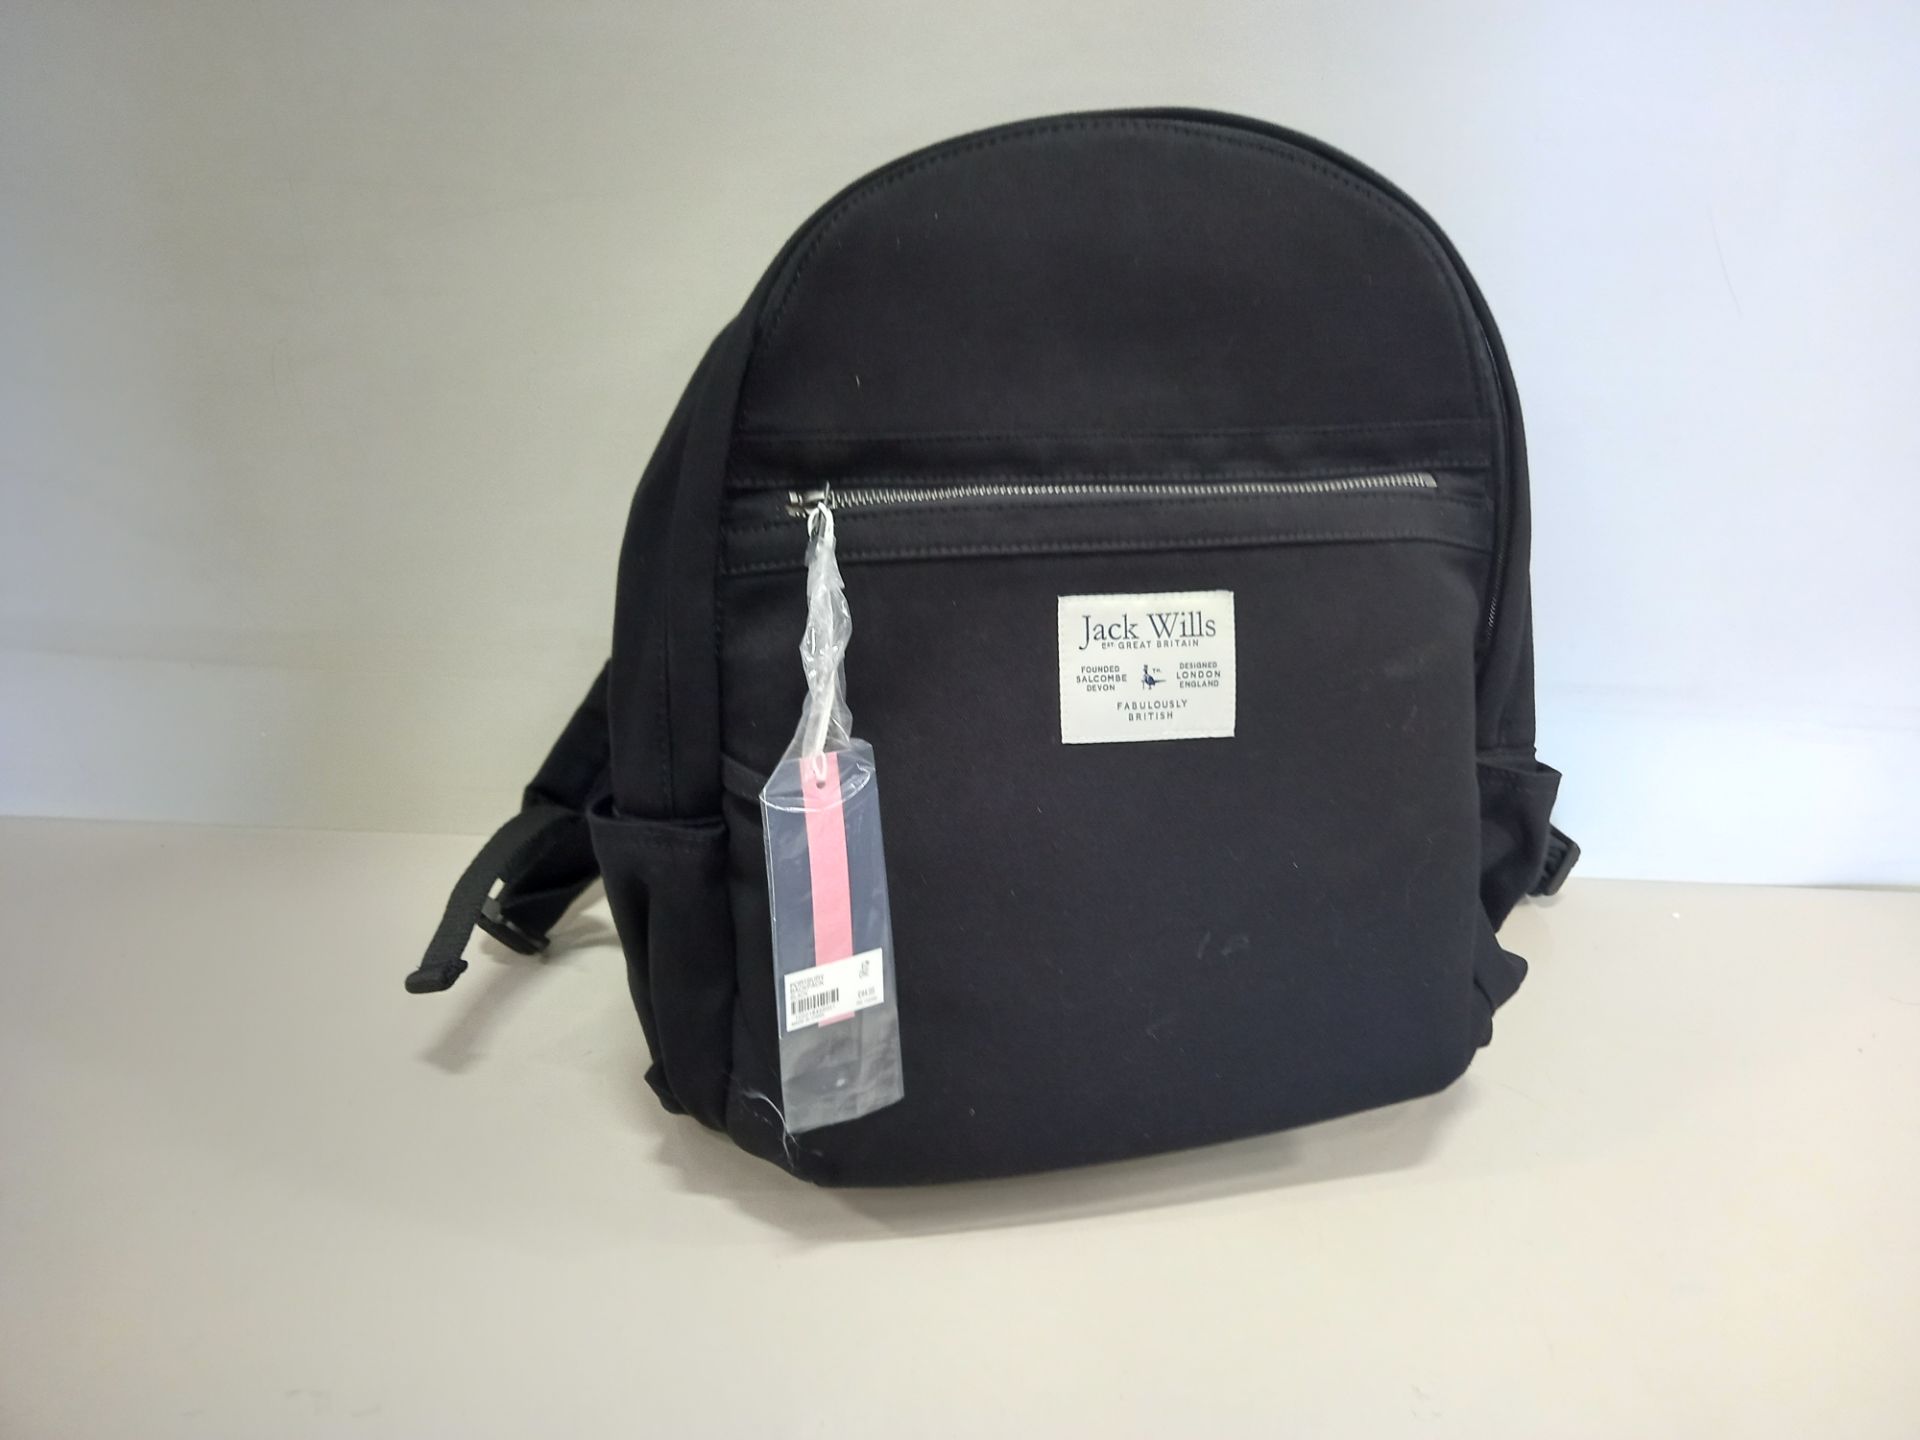 12 X BRAND NEW JACK WILLS PORTBURY BACKPACKS IN BLACK WITH SWING TICKETS RRP £44.95 EACH TOTAL £